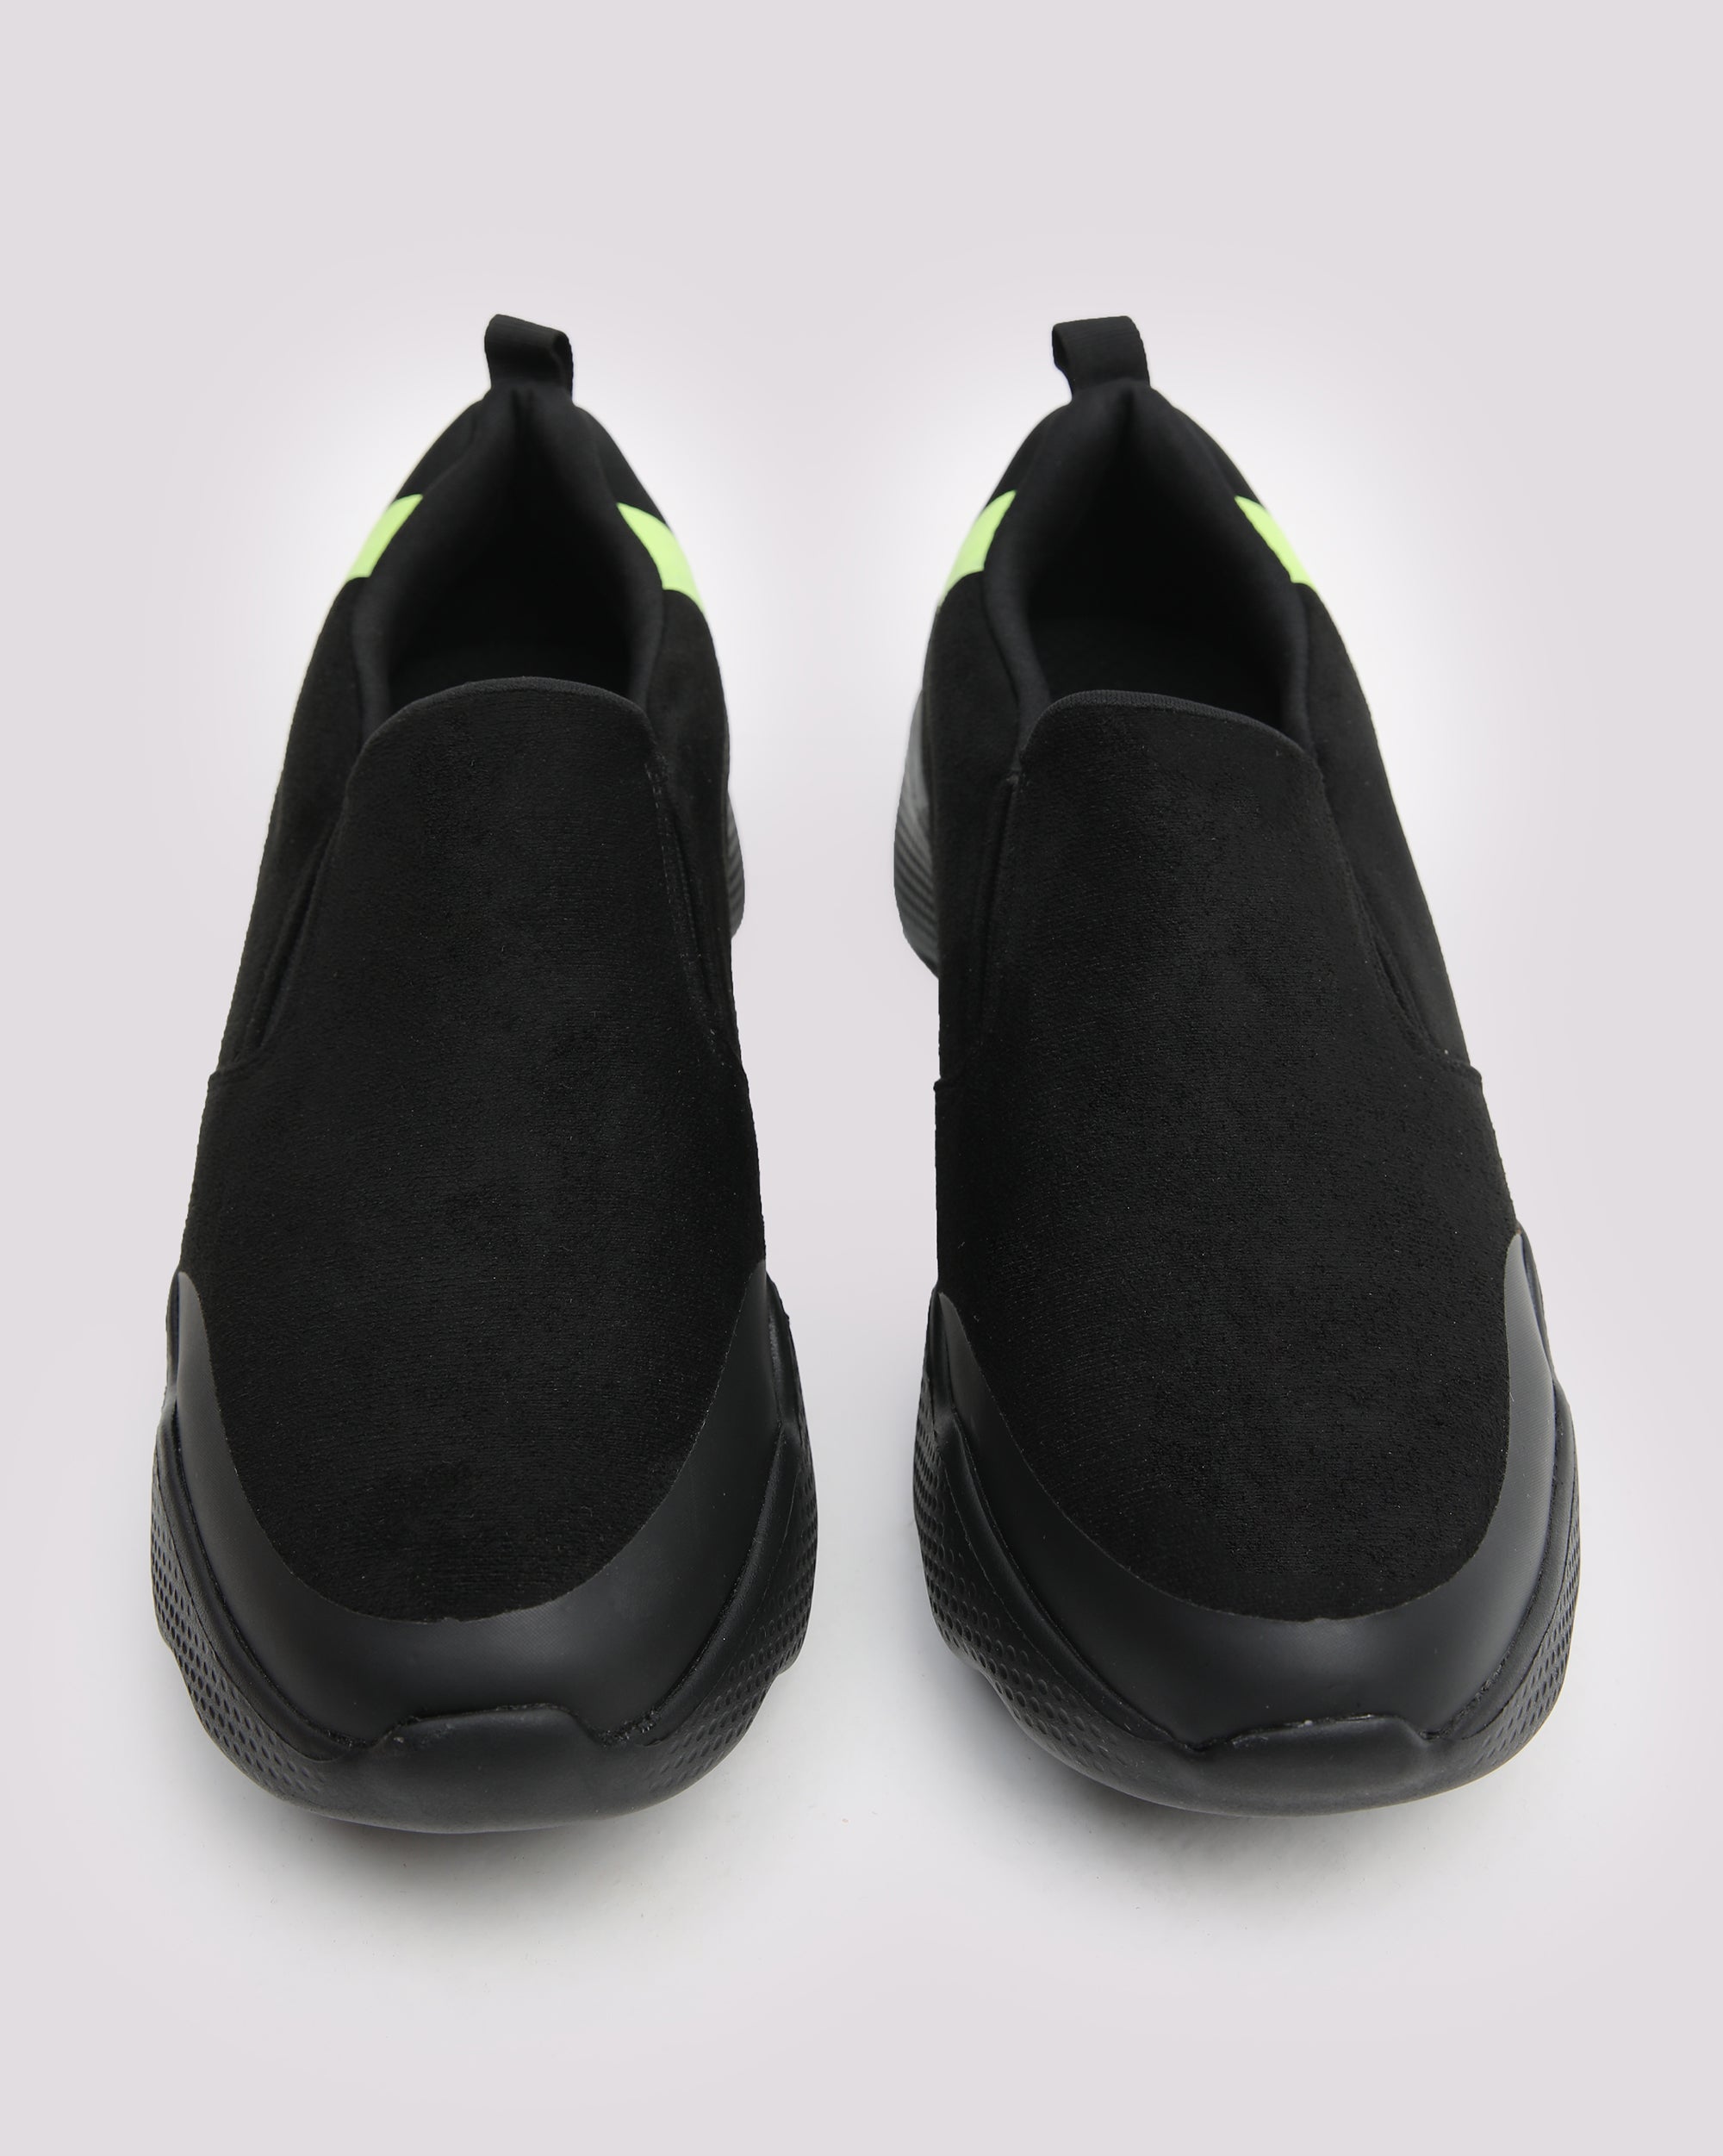 Light Weight Wavy Sole Shoes